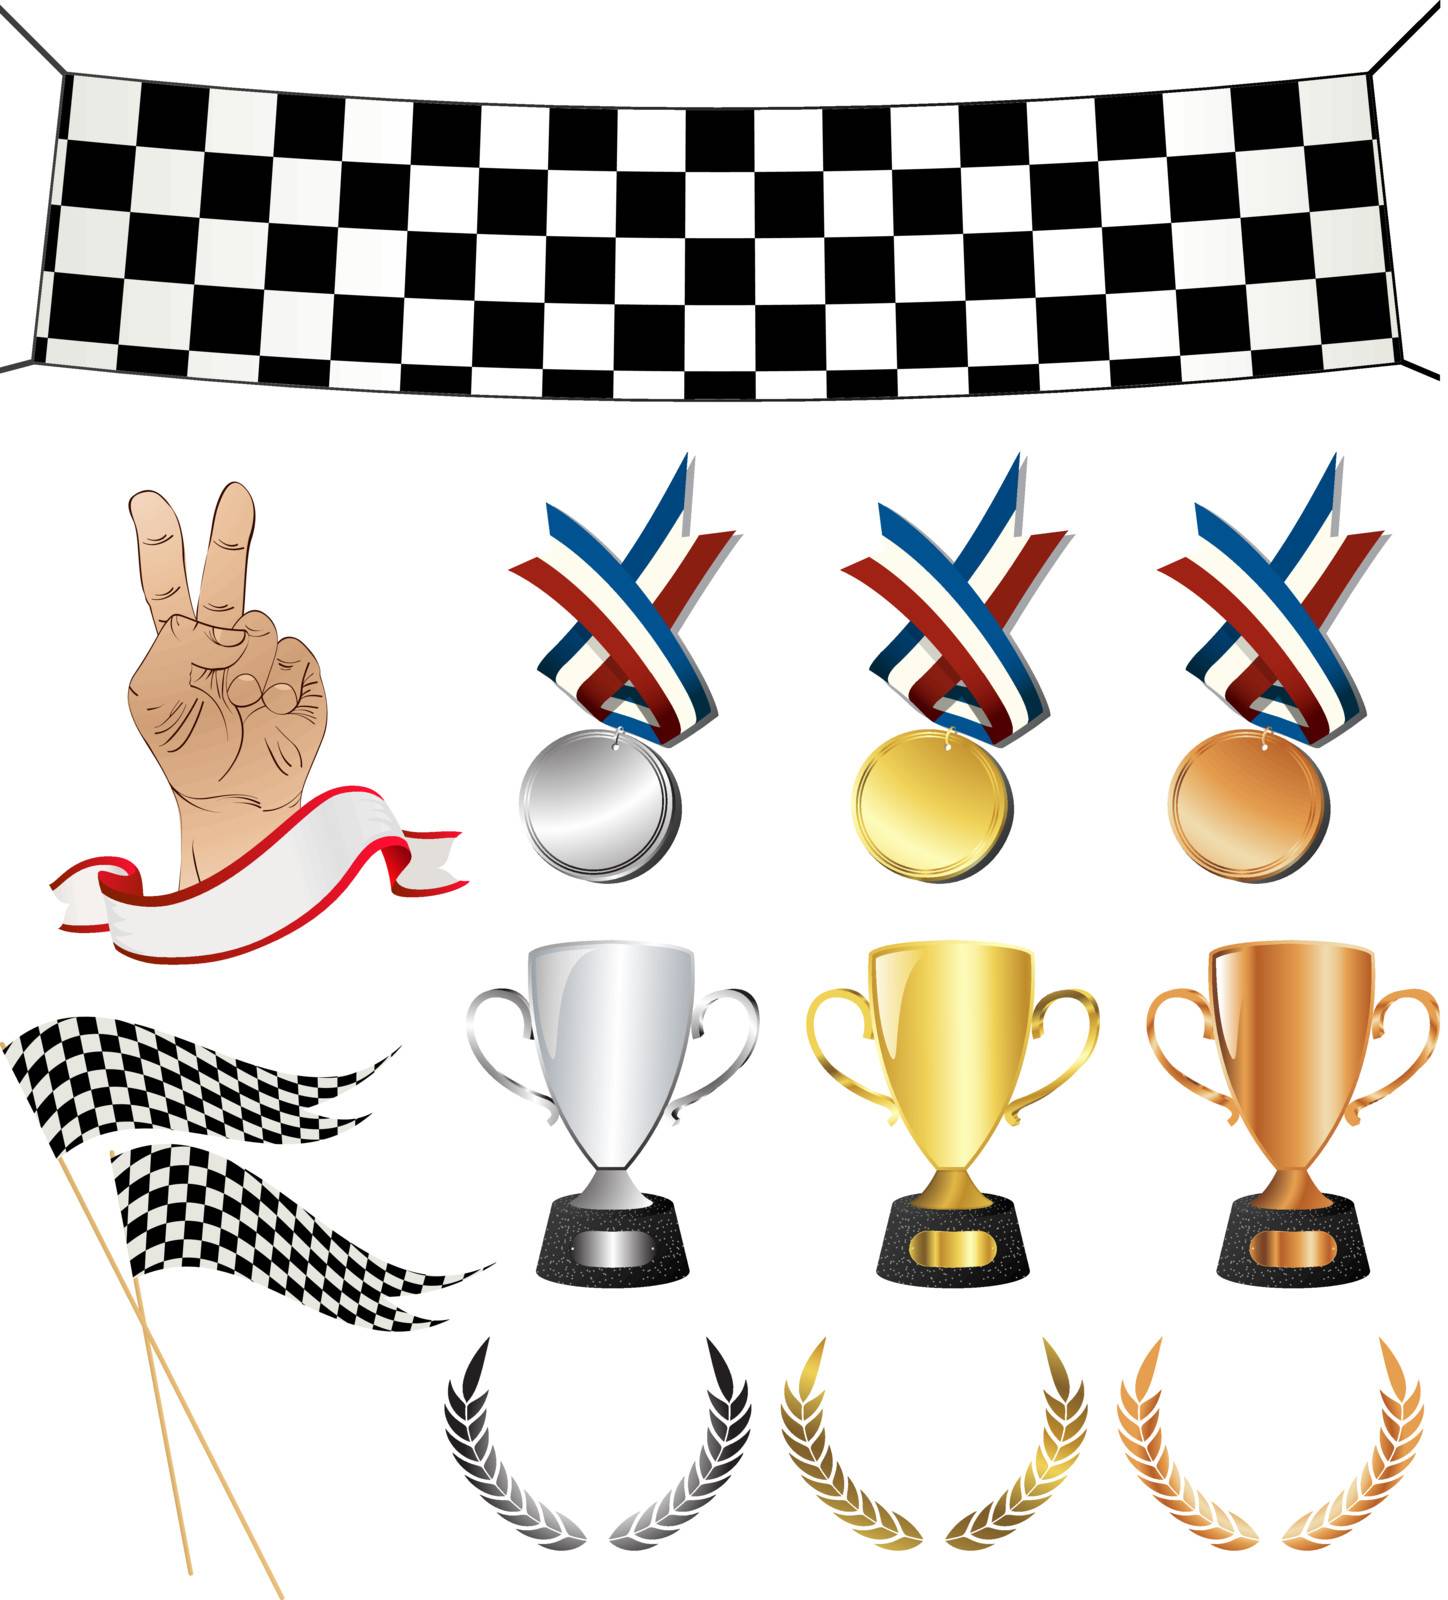 Victory icons, sports related set. Isolated and grouped objects over white background. No mesh or transparencies, easy to use, edit objects.